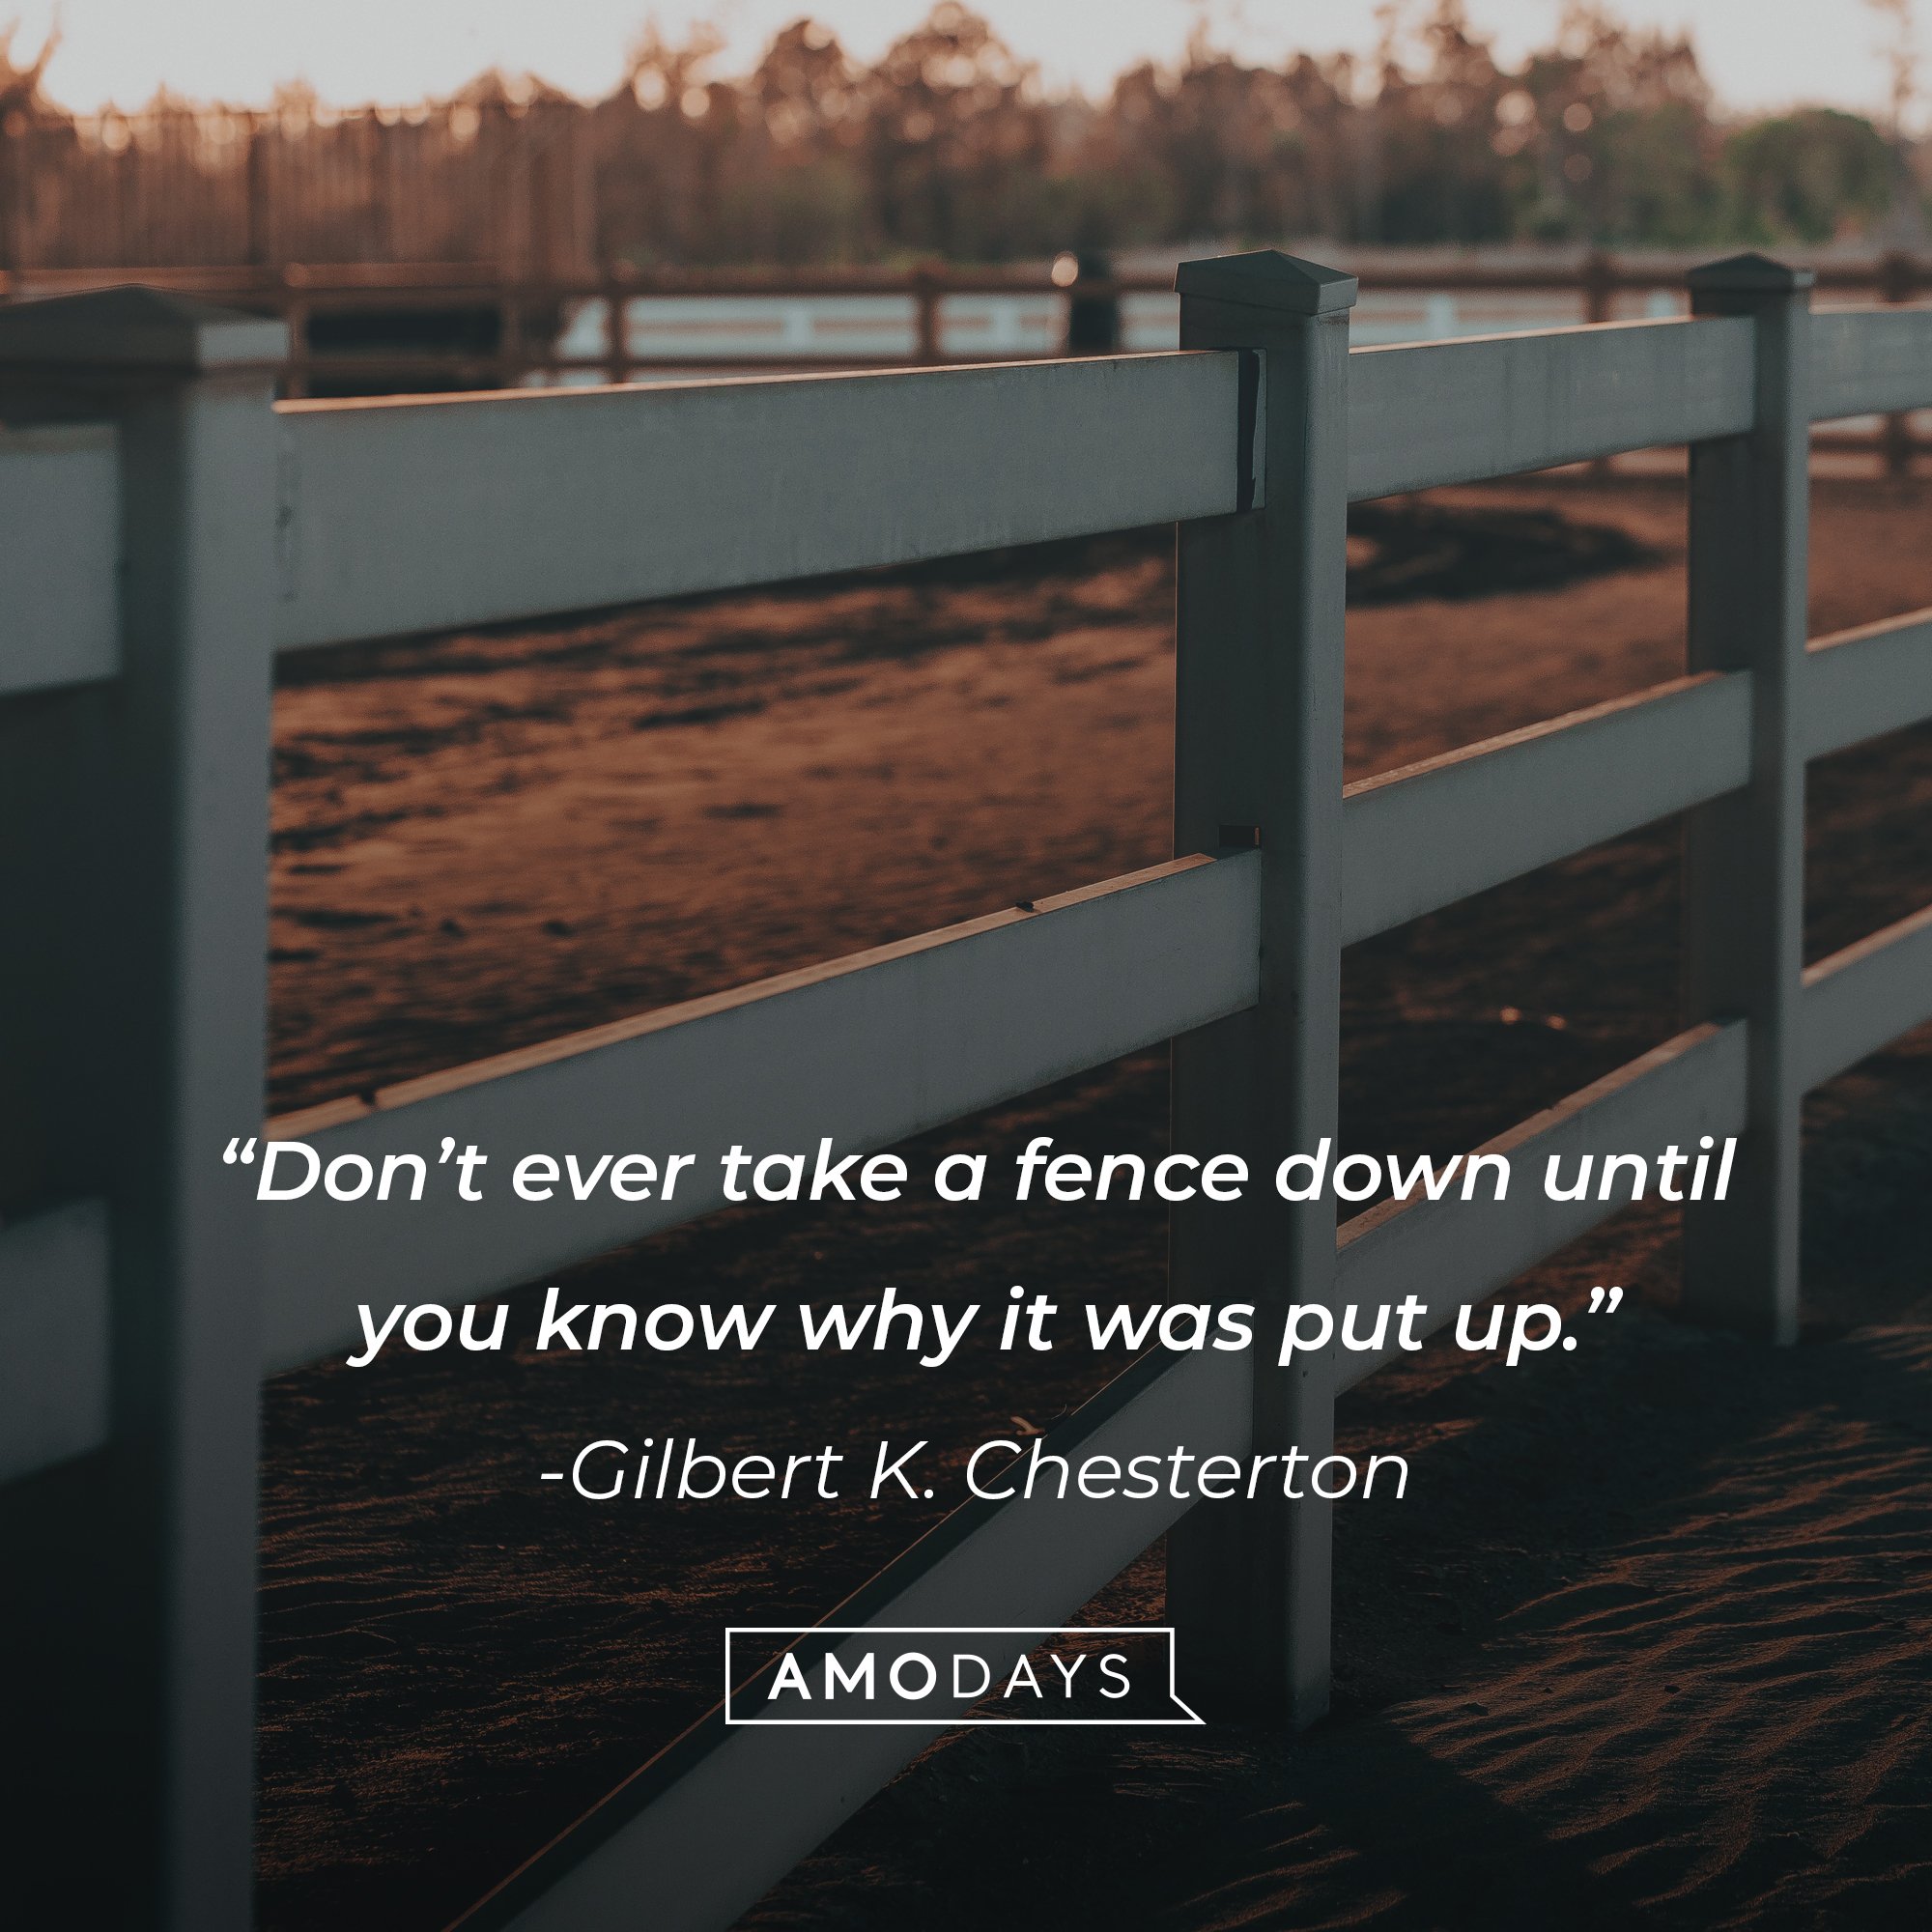 Gilbert K. Chesterton's quote: “Don’t ever take a fence down until you know why it was put up.” | Image: AmoDays